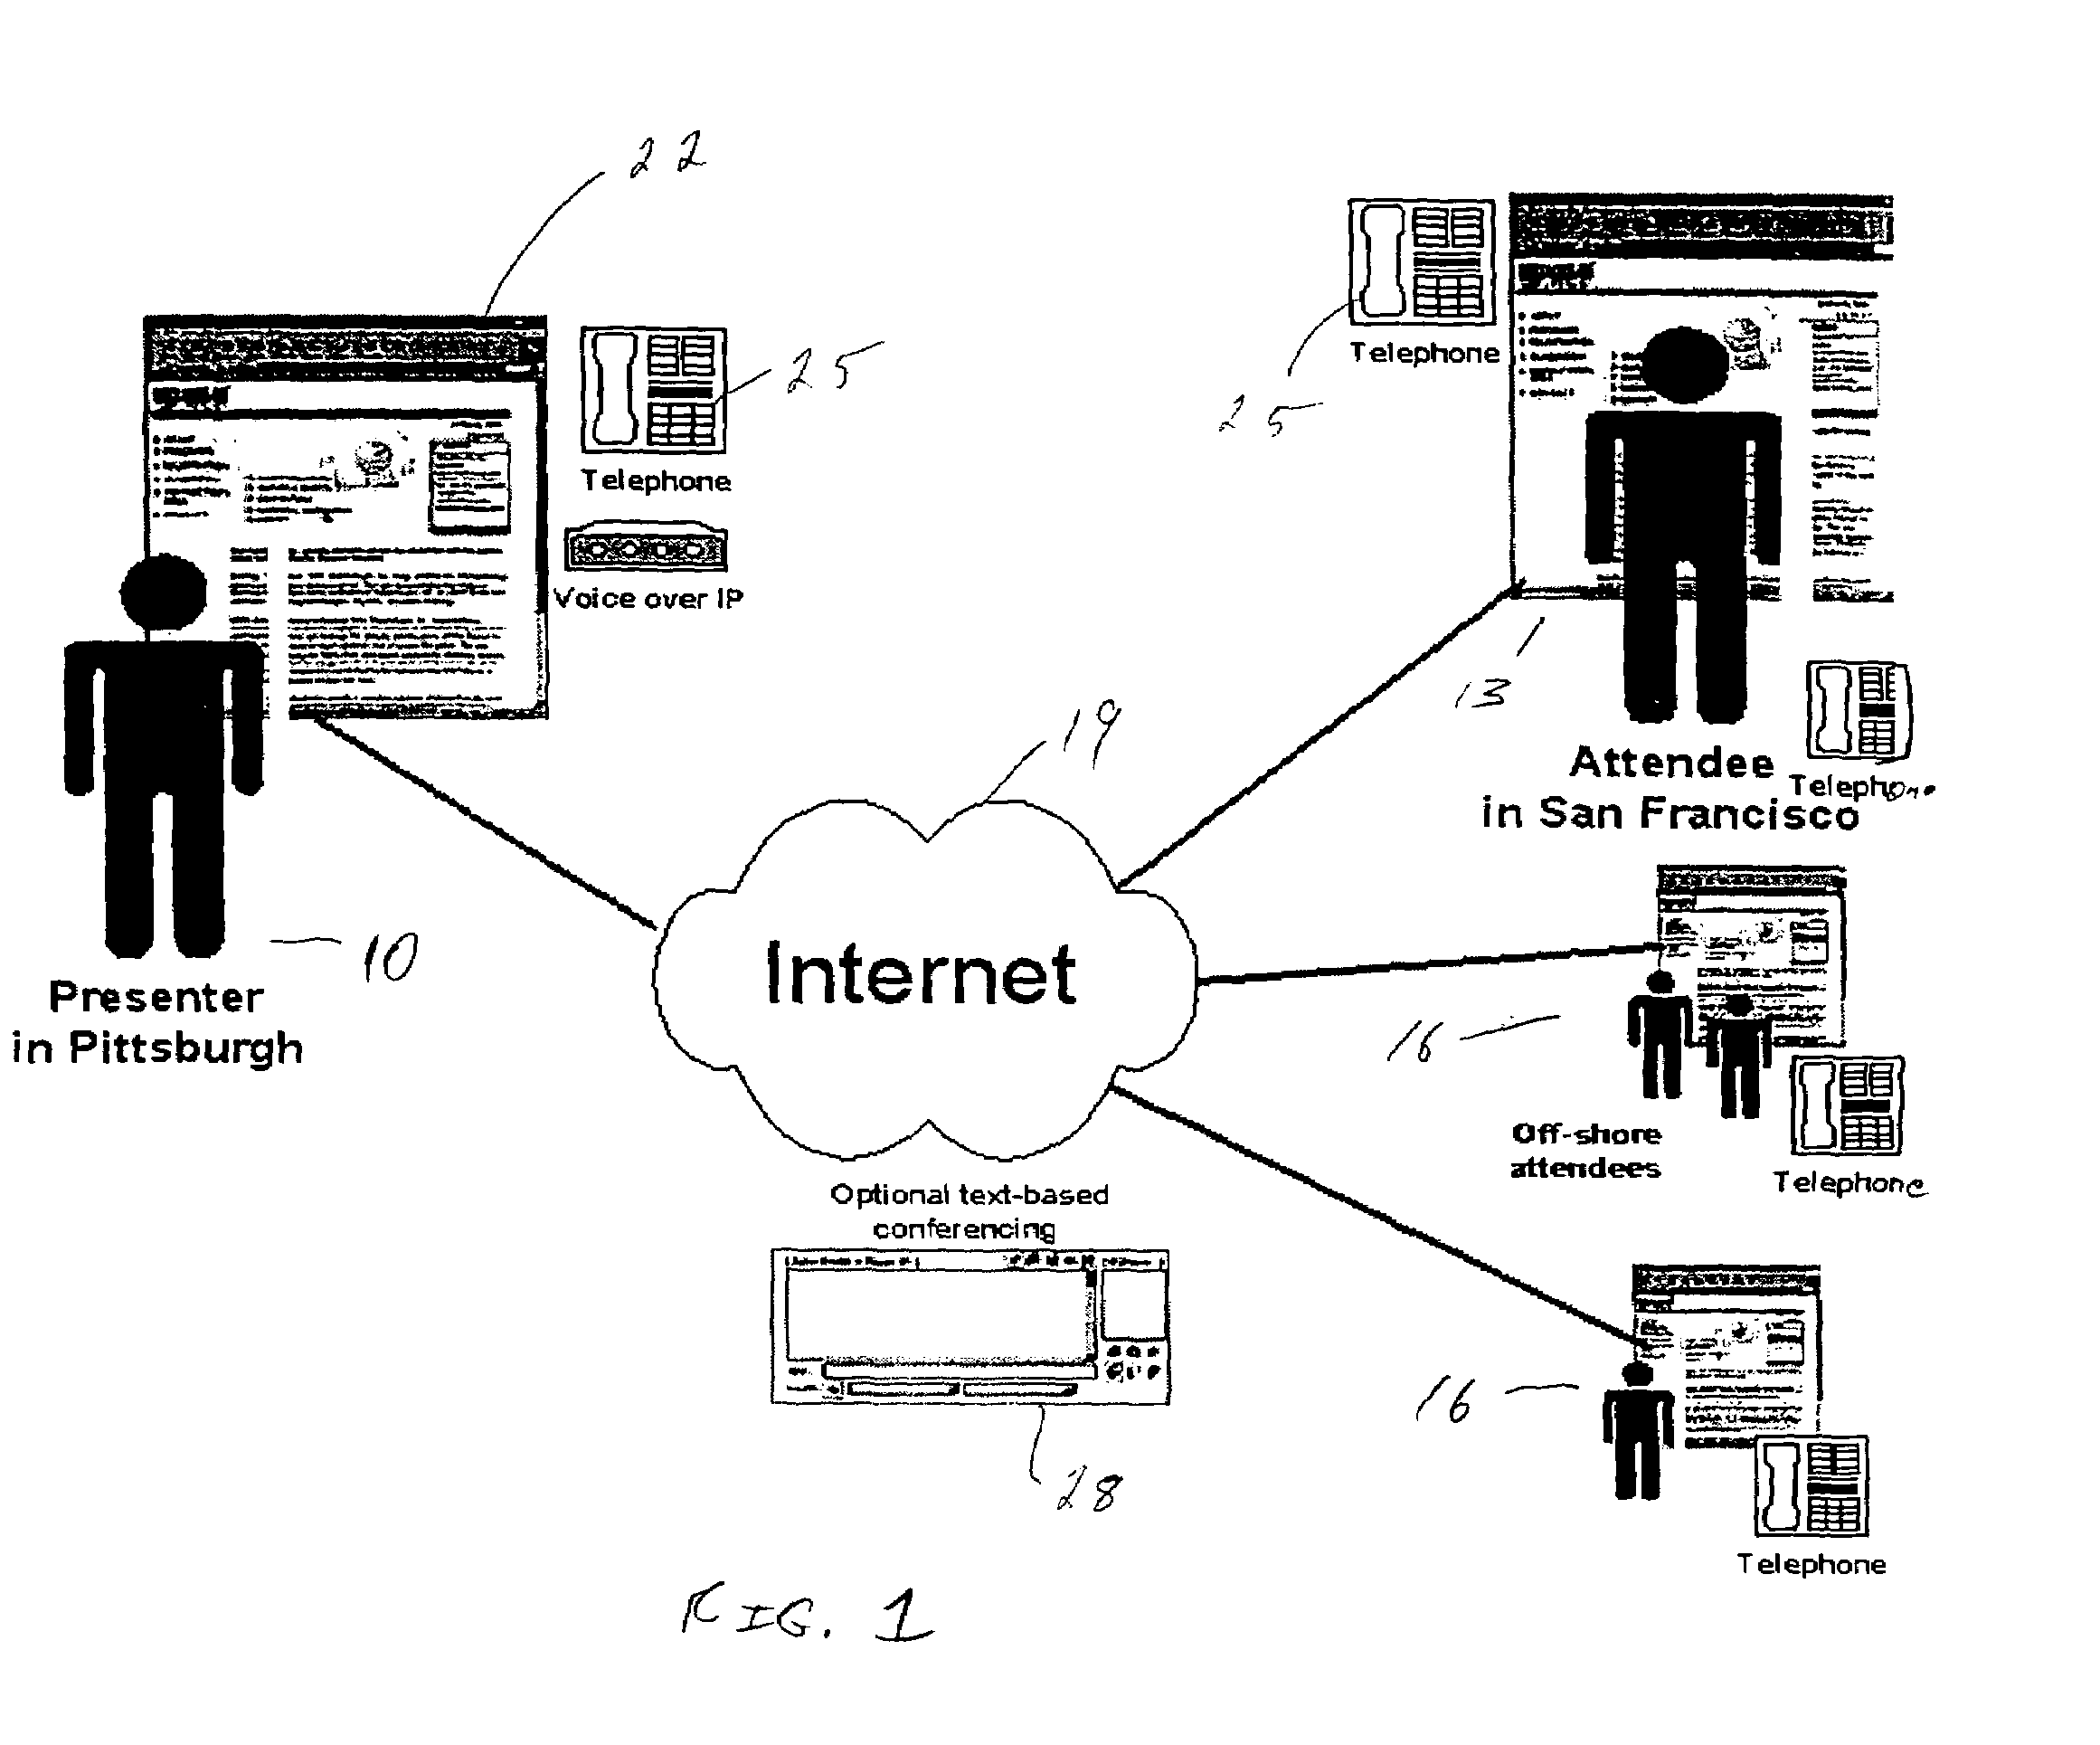 Shared web browser apparatus and method for interactive communications